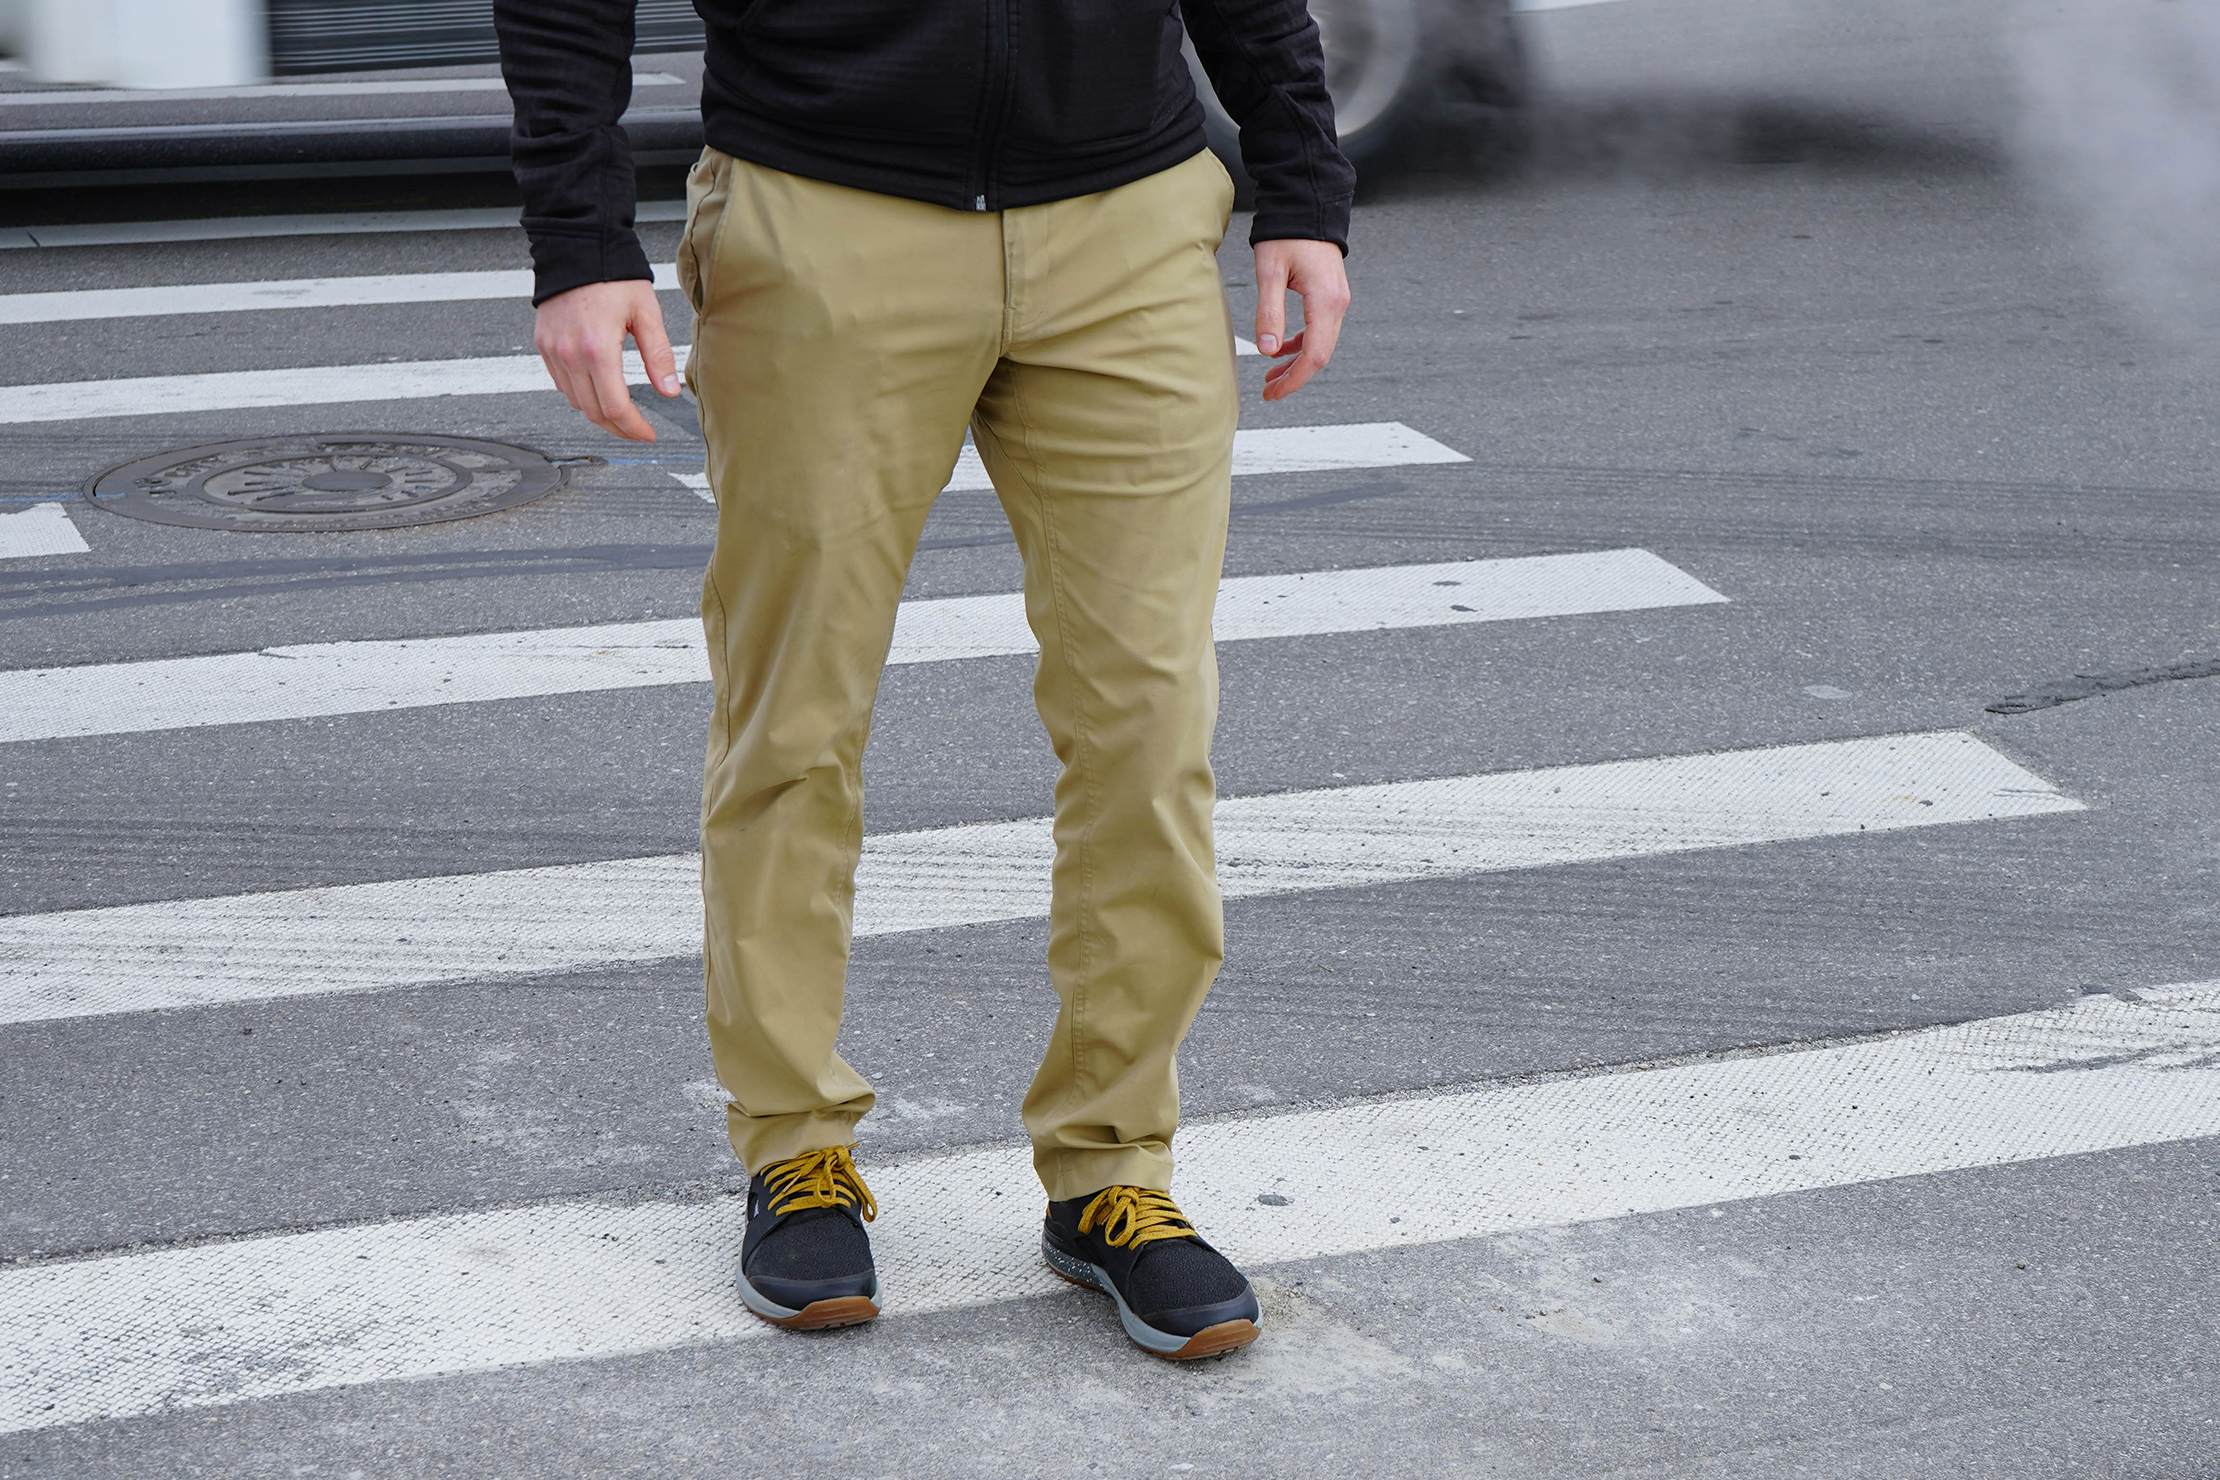 Bluffworks Ascender Chino Pants Review